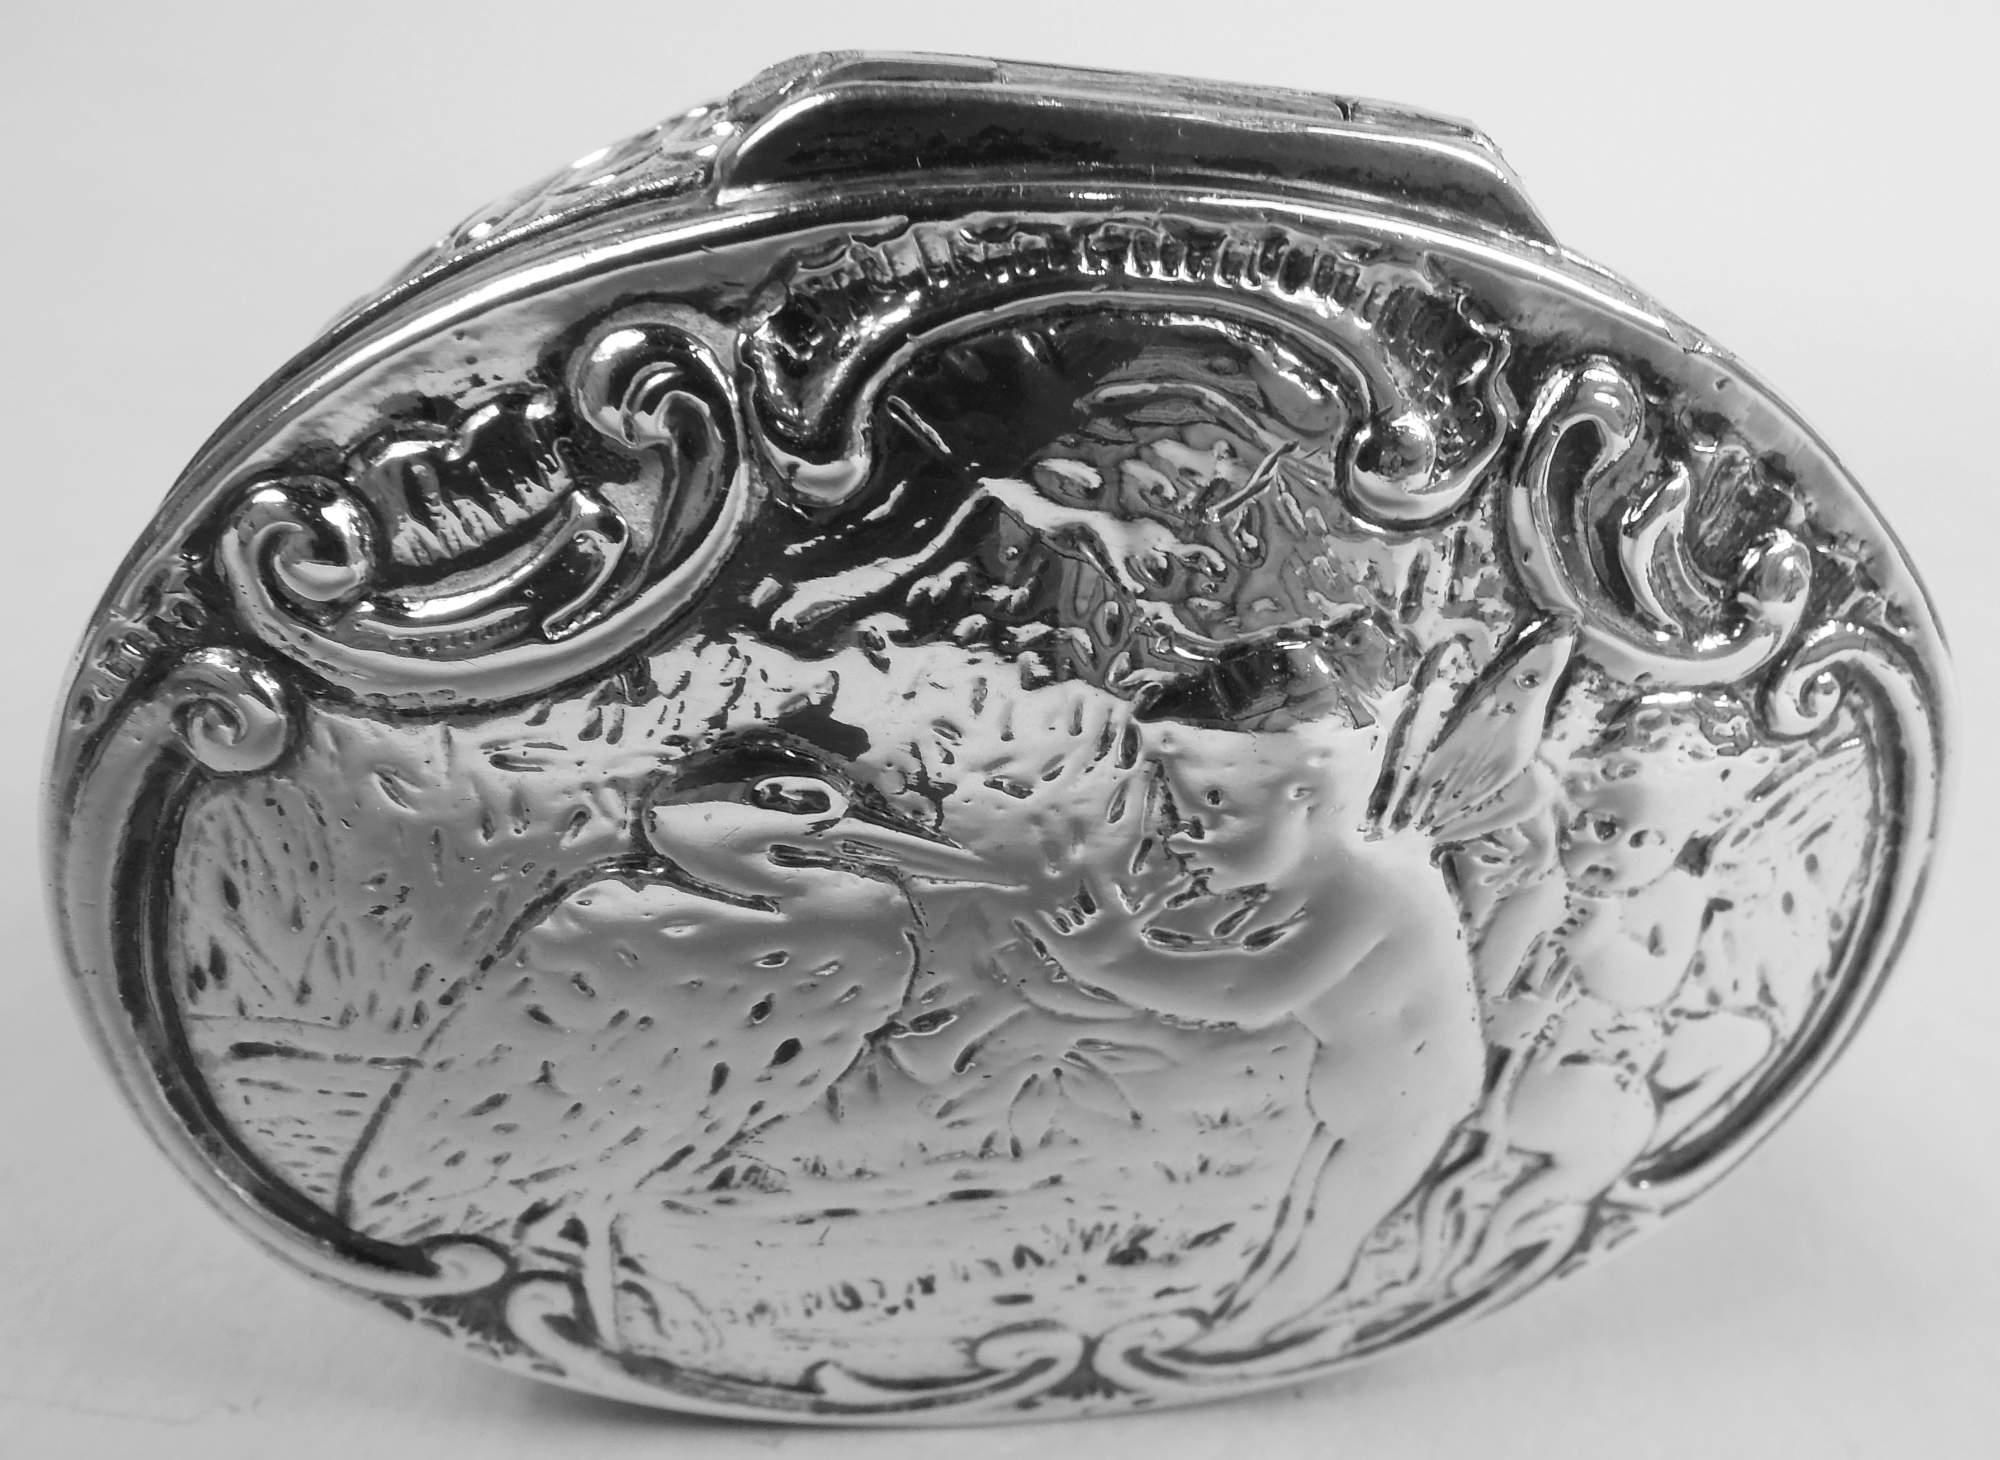 German Rococo 800 silver snuffbox, ca 1910. Oval with hinged cover; on top is chased scene depicting a large bird confronting two cherubs with soft chubby bodies and ethereal wings. Probably an allusion to some or other episode in Classical